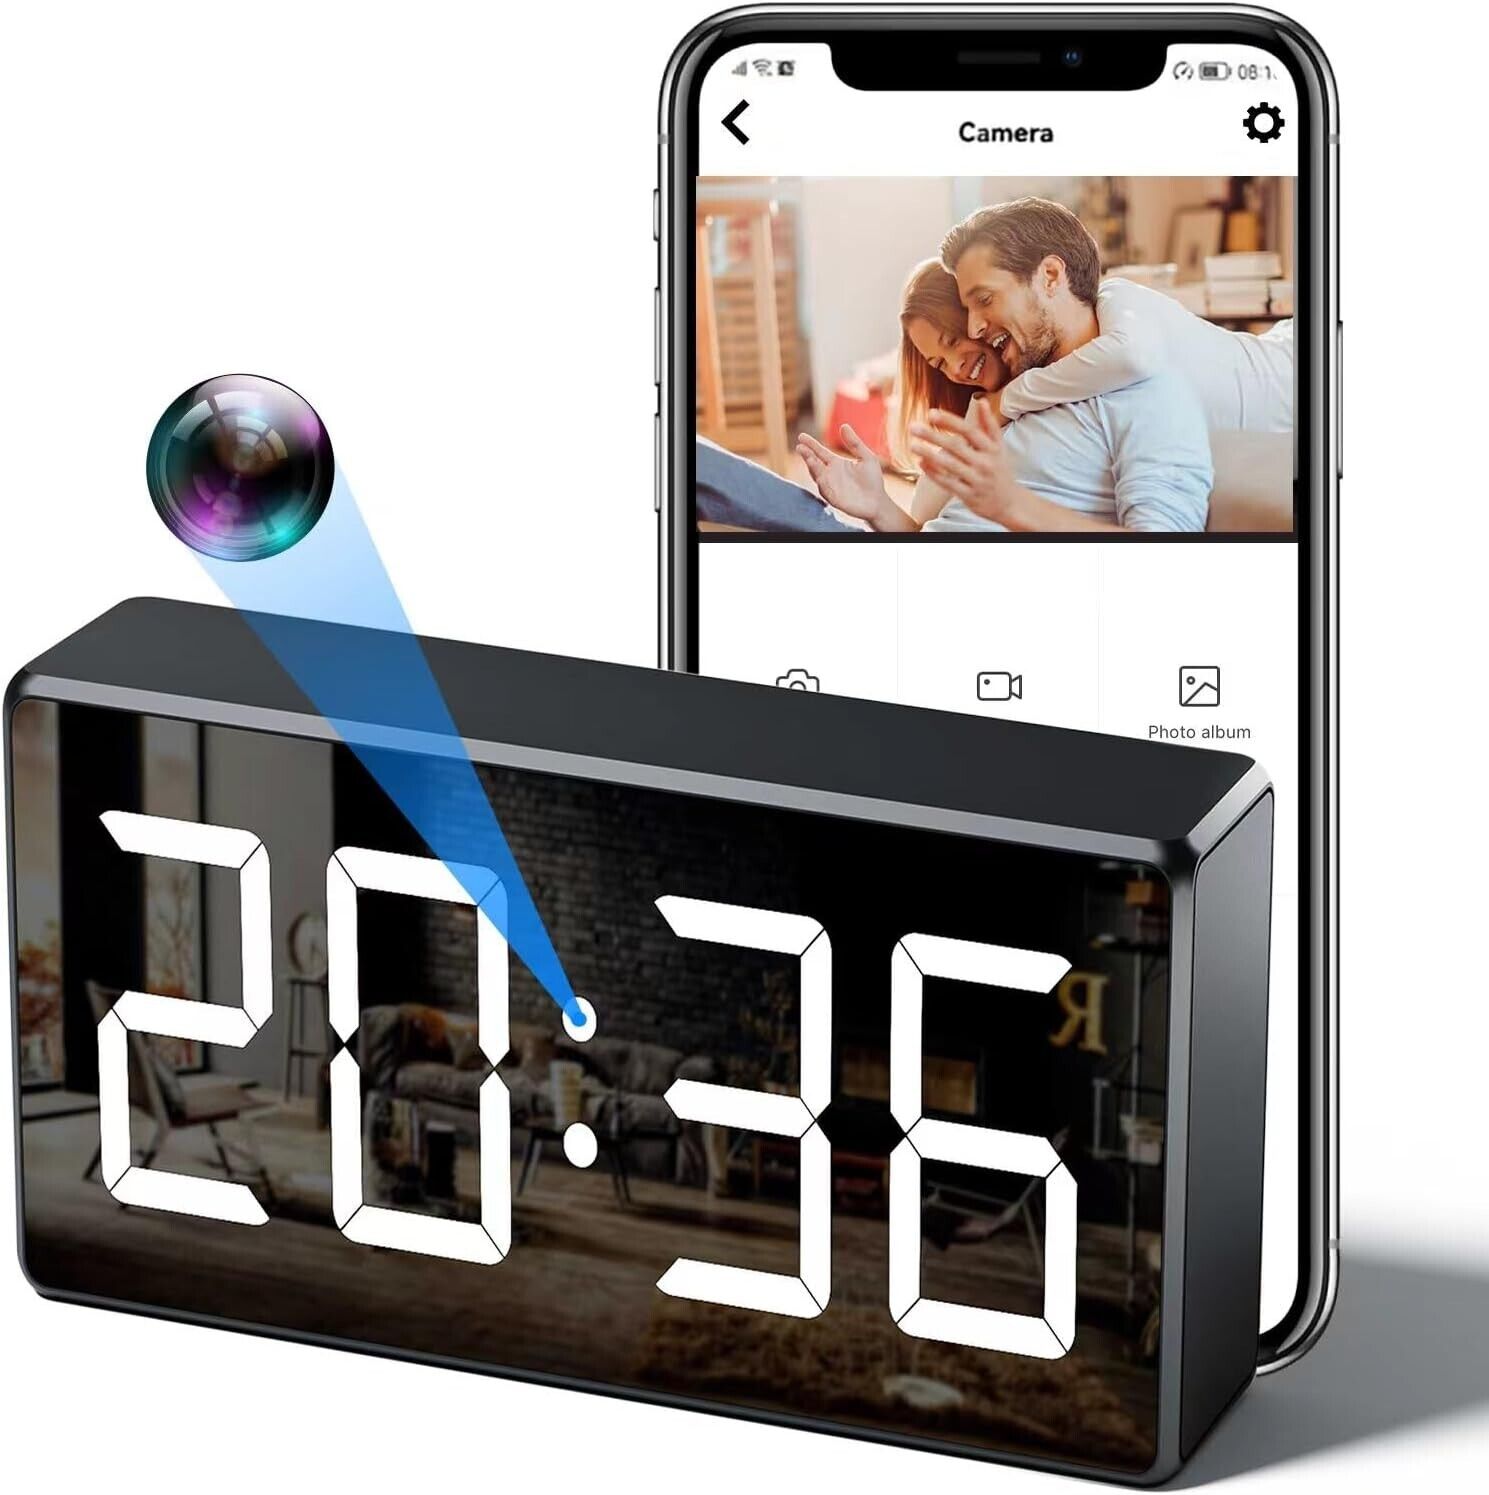 Video Cameras Clock 4K HD Video Cameras with Motion Detection for Baby Monitors